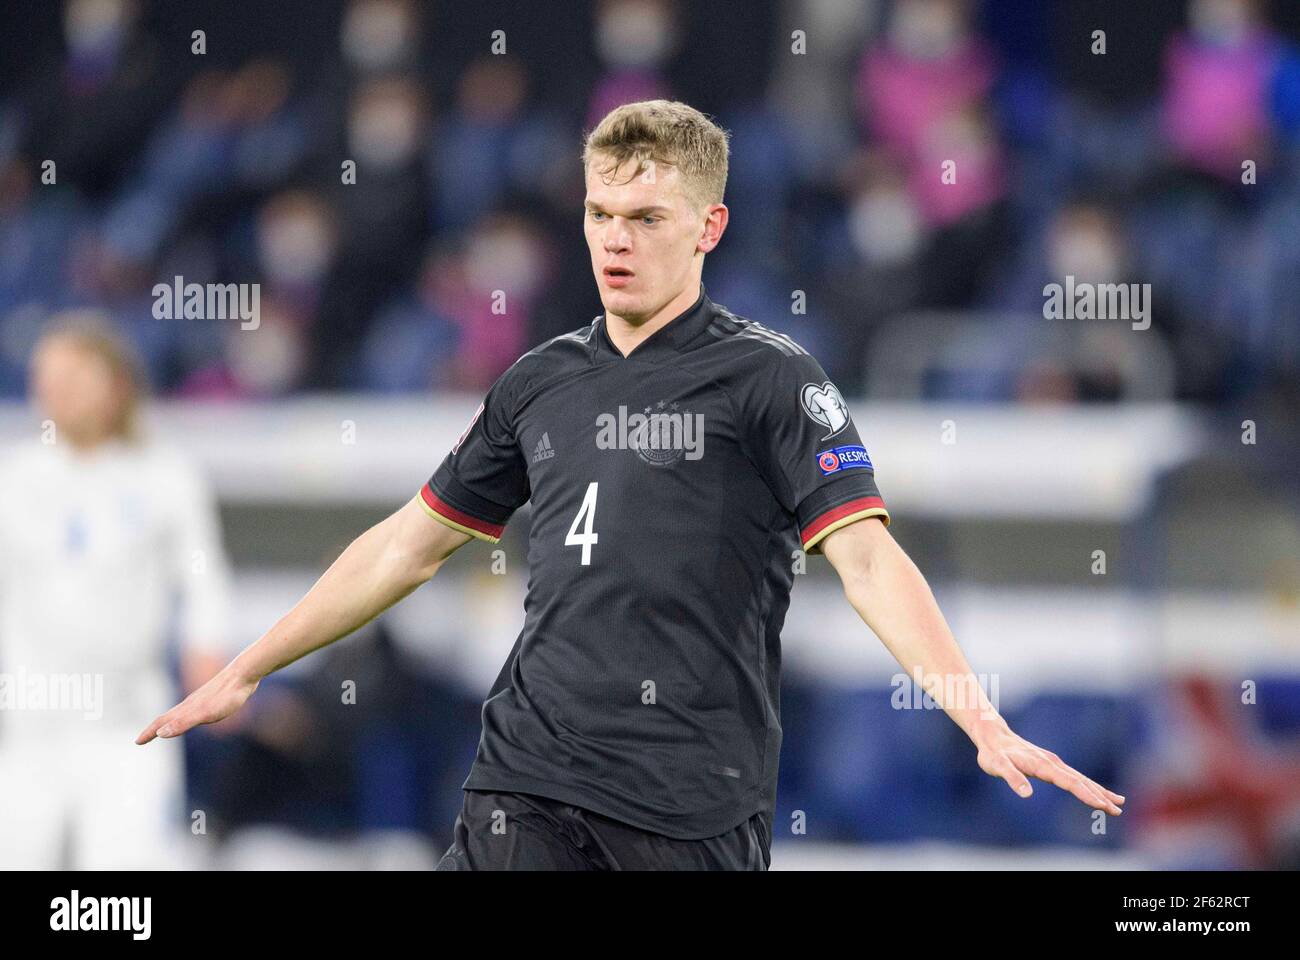 Matthias GINTER (GER) gesture, gesture, Soccer Laenderspiel, World Cup Qualification Group J matchday 1, Germany (GER) - Iceland (ISL) 3: 0, il 25 marzo 2021 a Duisburg/Germania. Â | utilizzo in tutto il mondo Foto Stock